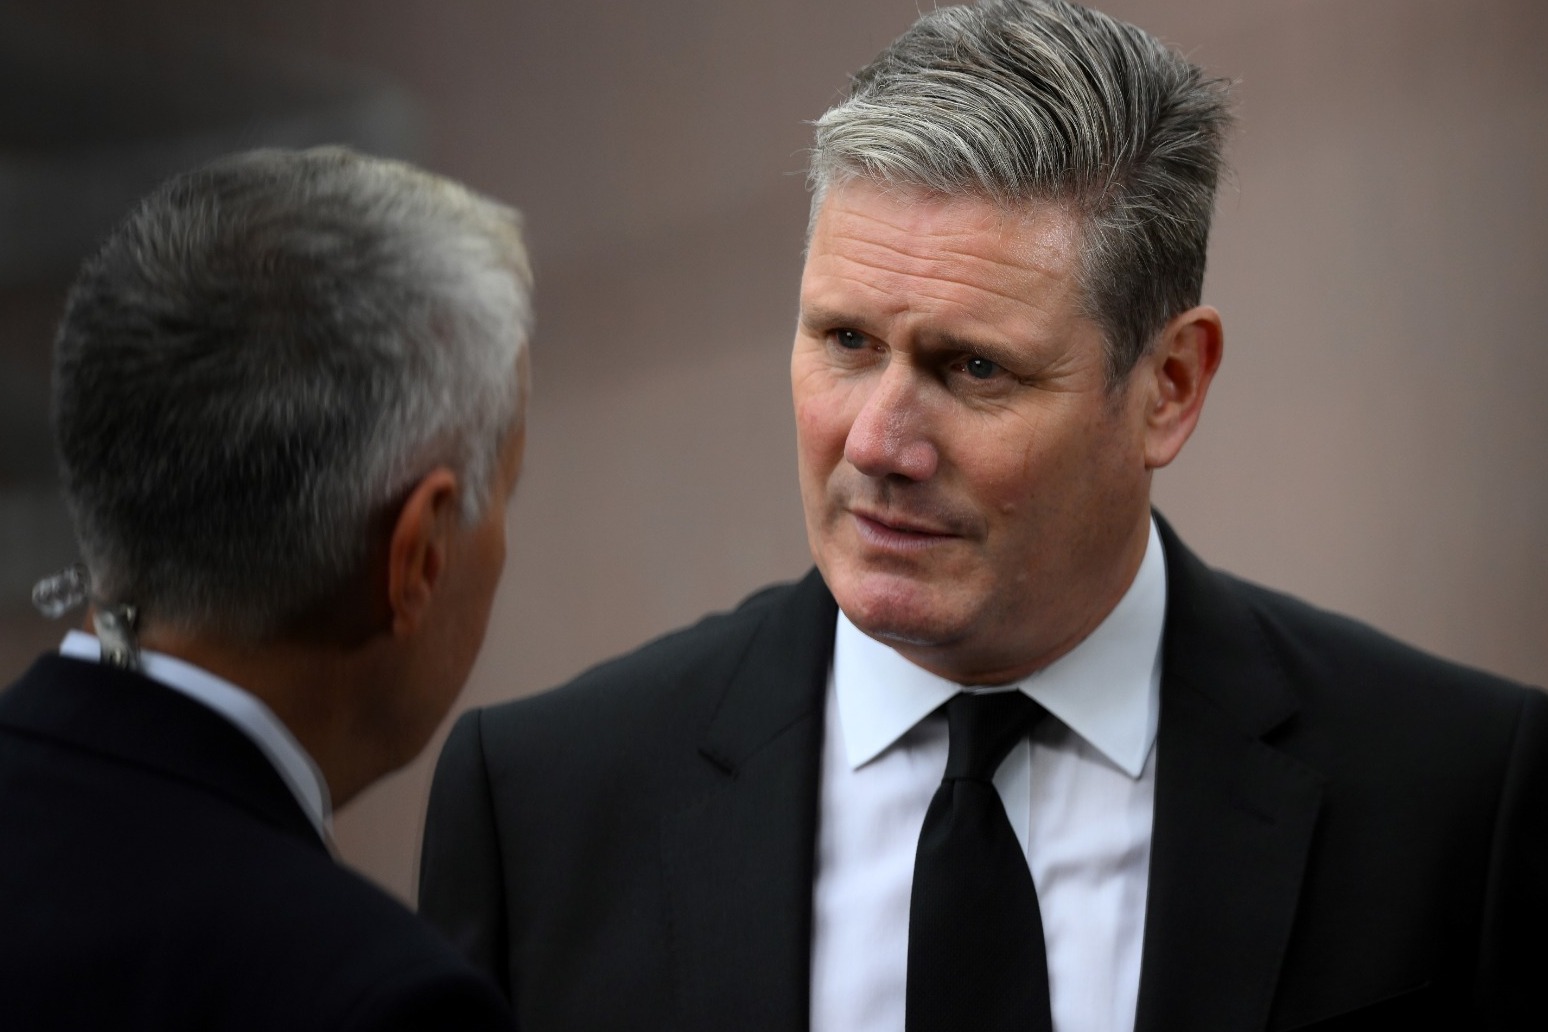 Starmer sets out energy plan and hits out at ’12 years of failure’ under Tories 